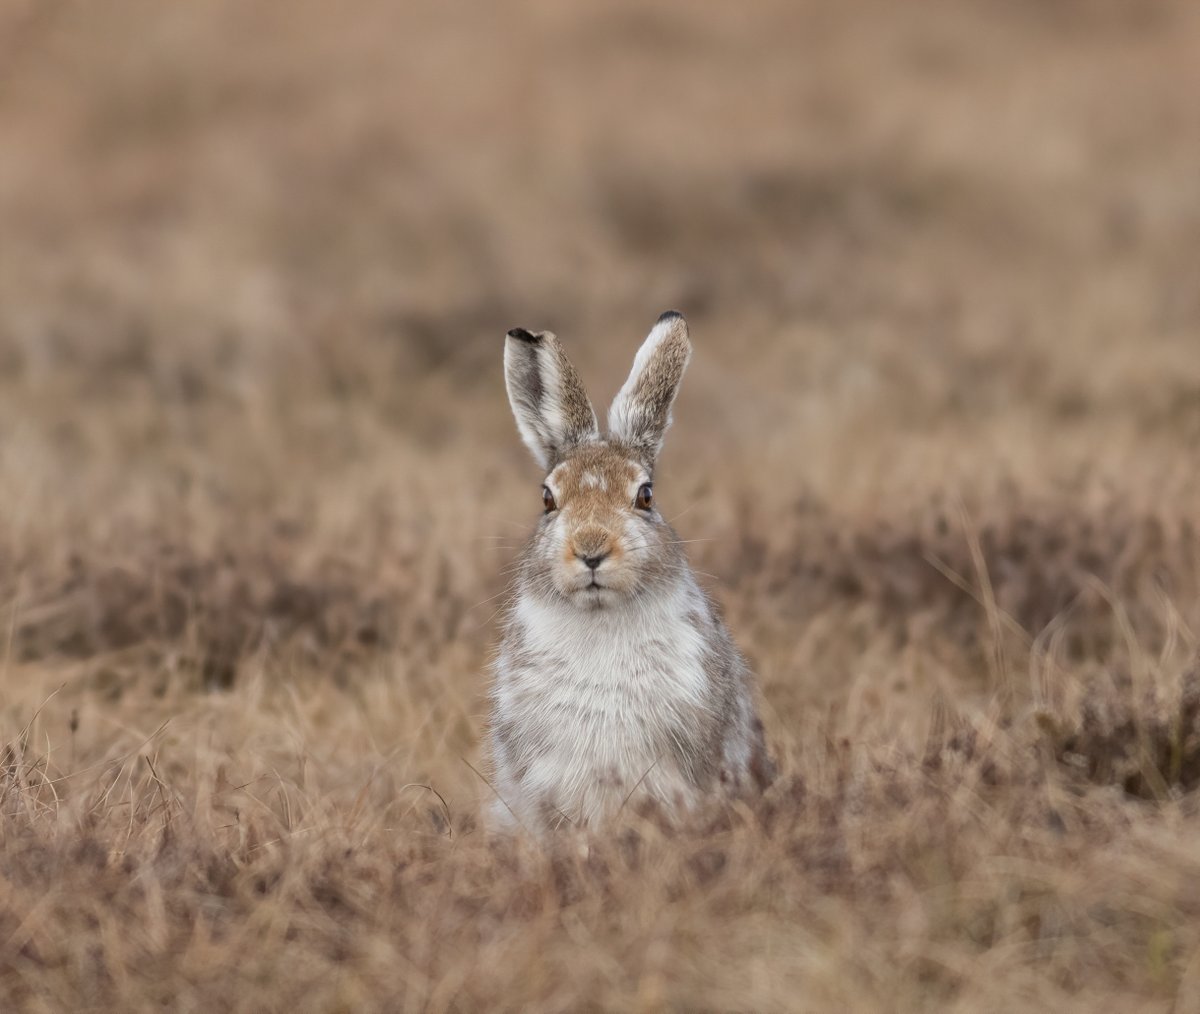 Mountain  hare. It's the peak of the breeding season at the moment, so these normally nocturnal animals are more active in the day than usual. #WildlifePhotographer #Nature #MountainHare #UKWildlife #BBCSpringWatch #NaturePhotography #PeakDistrict #DarkPeaks #mycanon